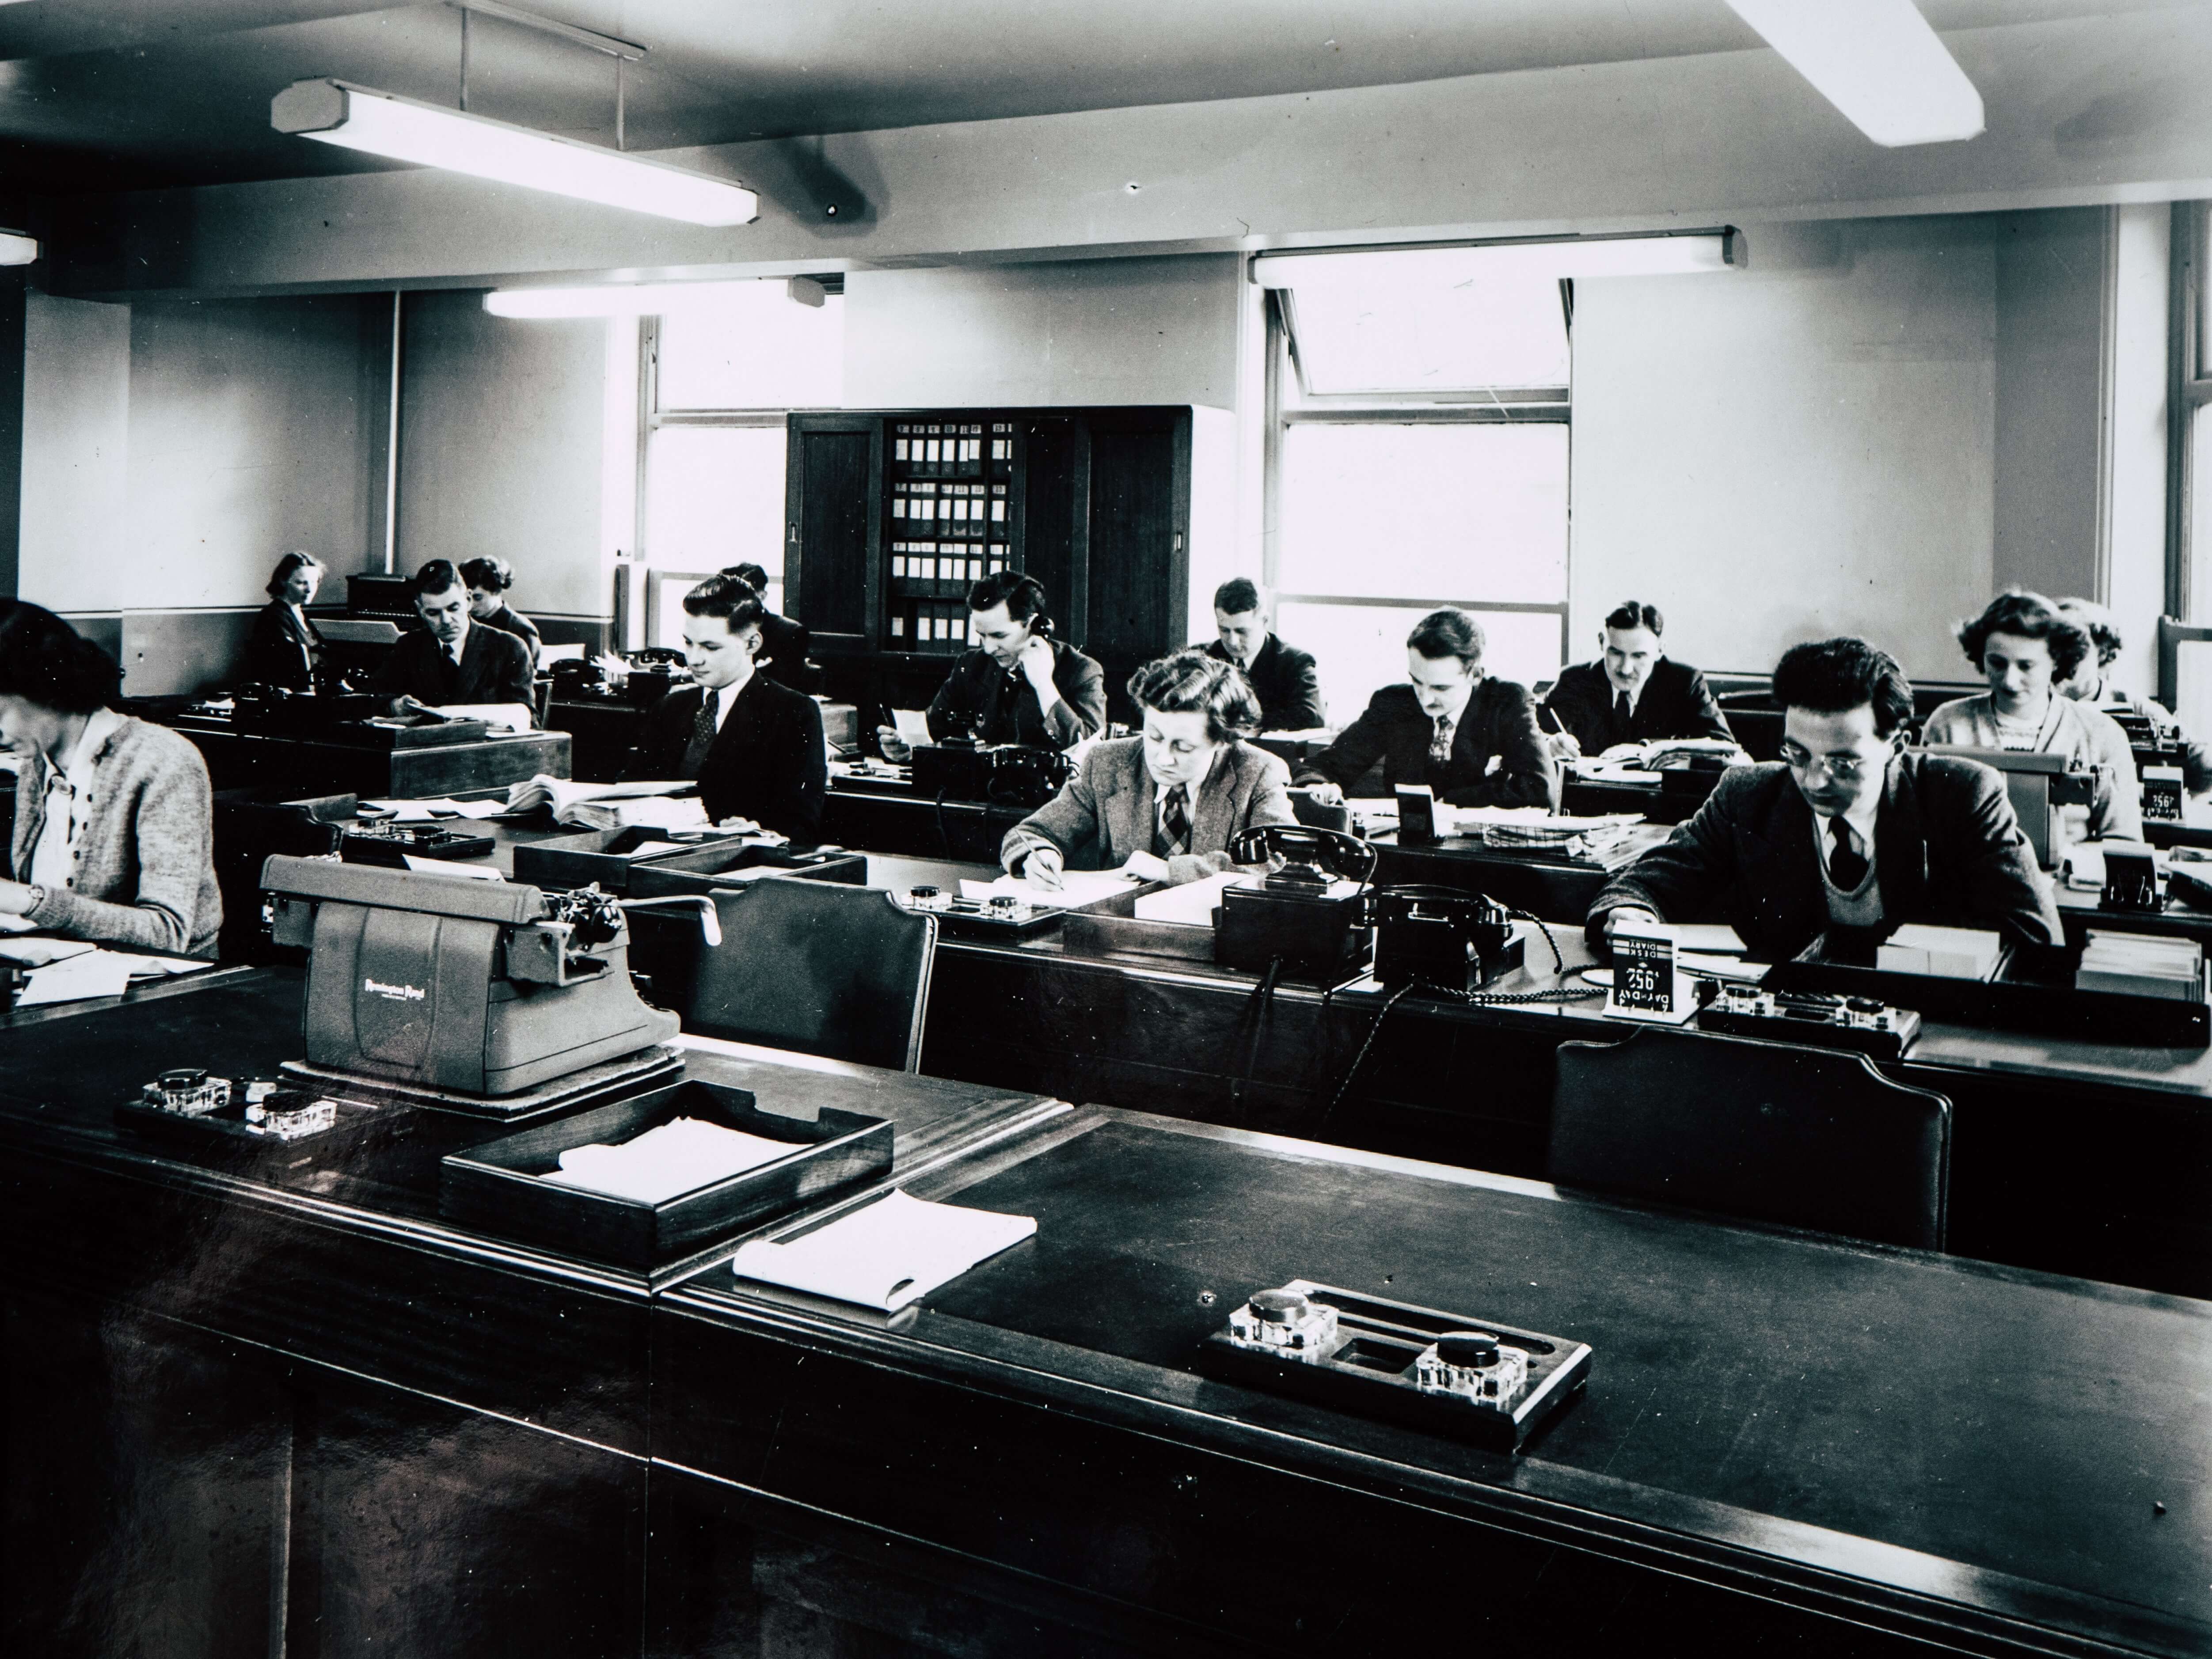 retro photo of office workers on typewriters